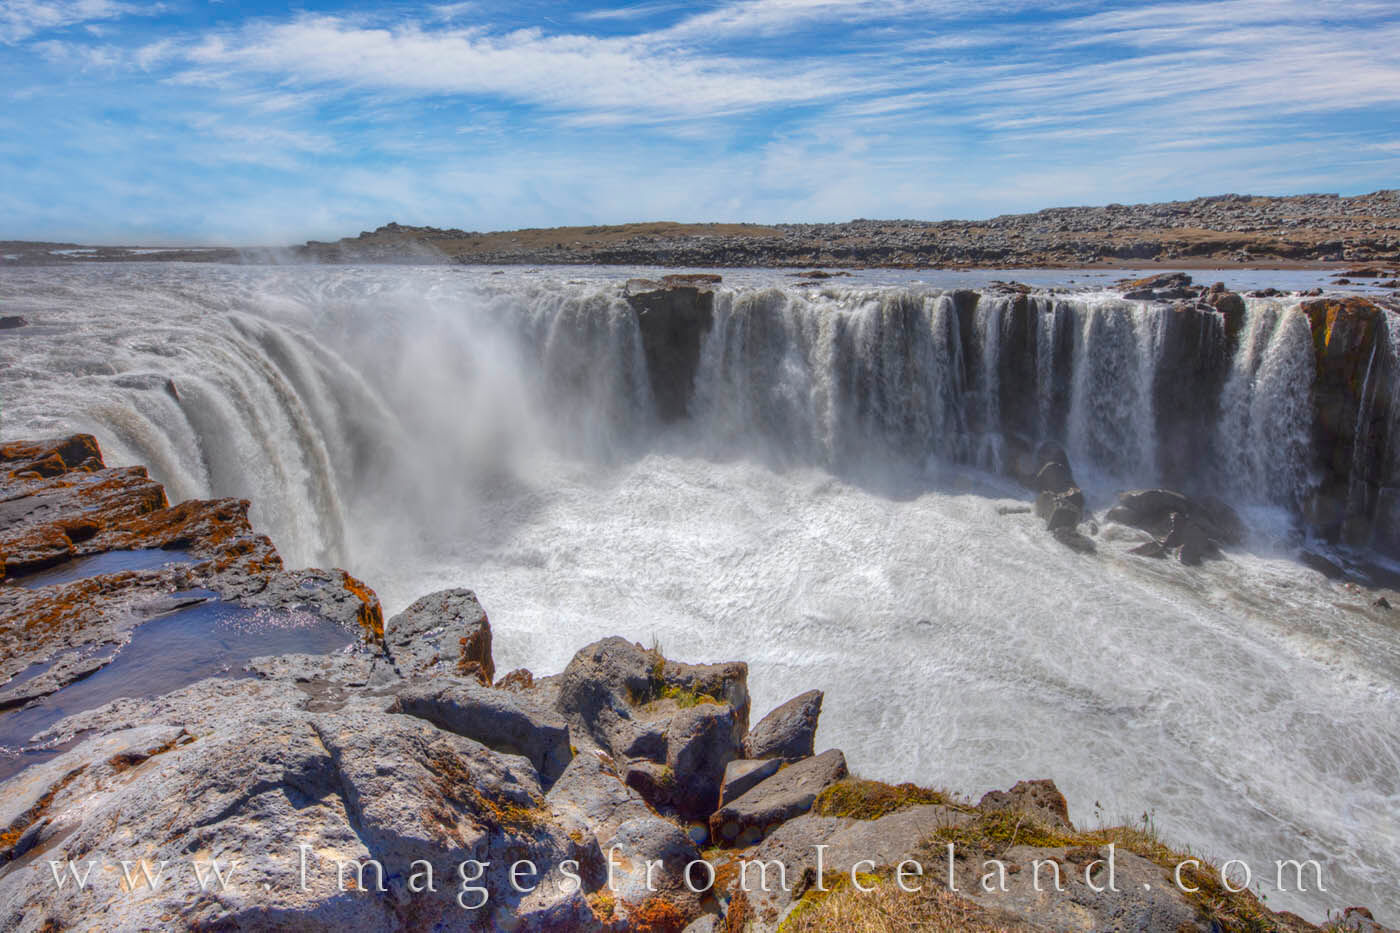 Just a short walk from the more famous Dettifoss, Selfoss is a beautiful sight as well.  Selfoss flows from the same glacier...